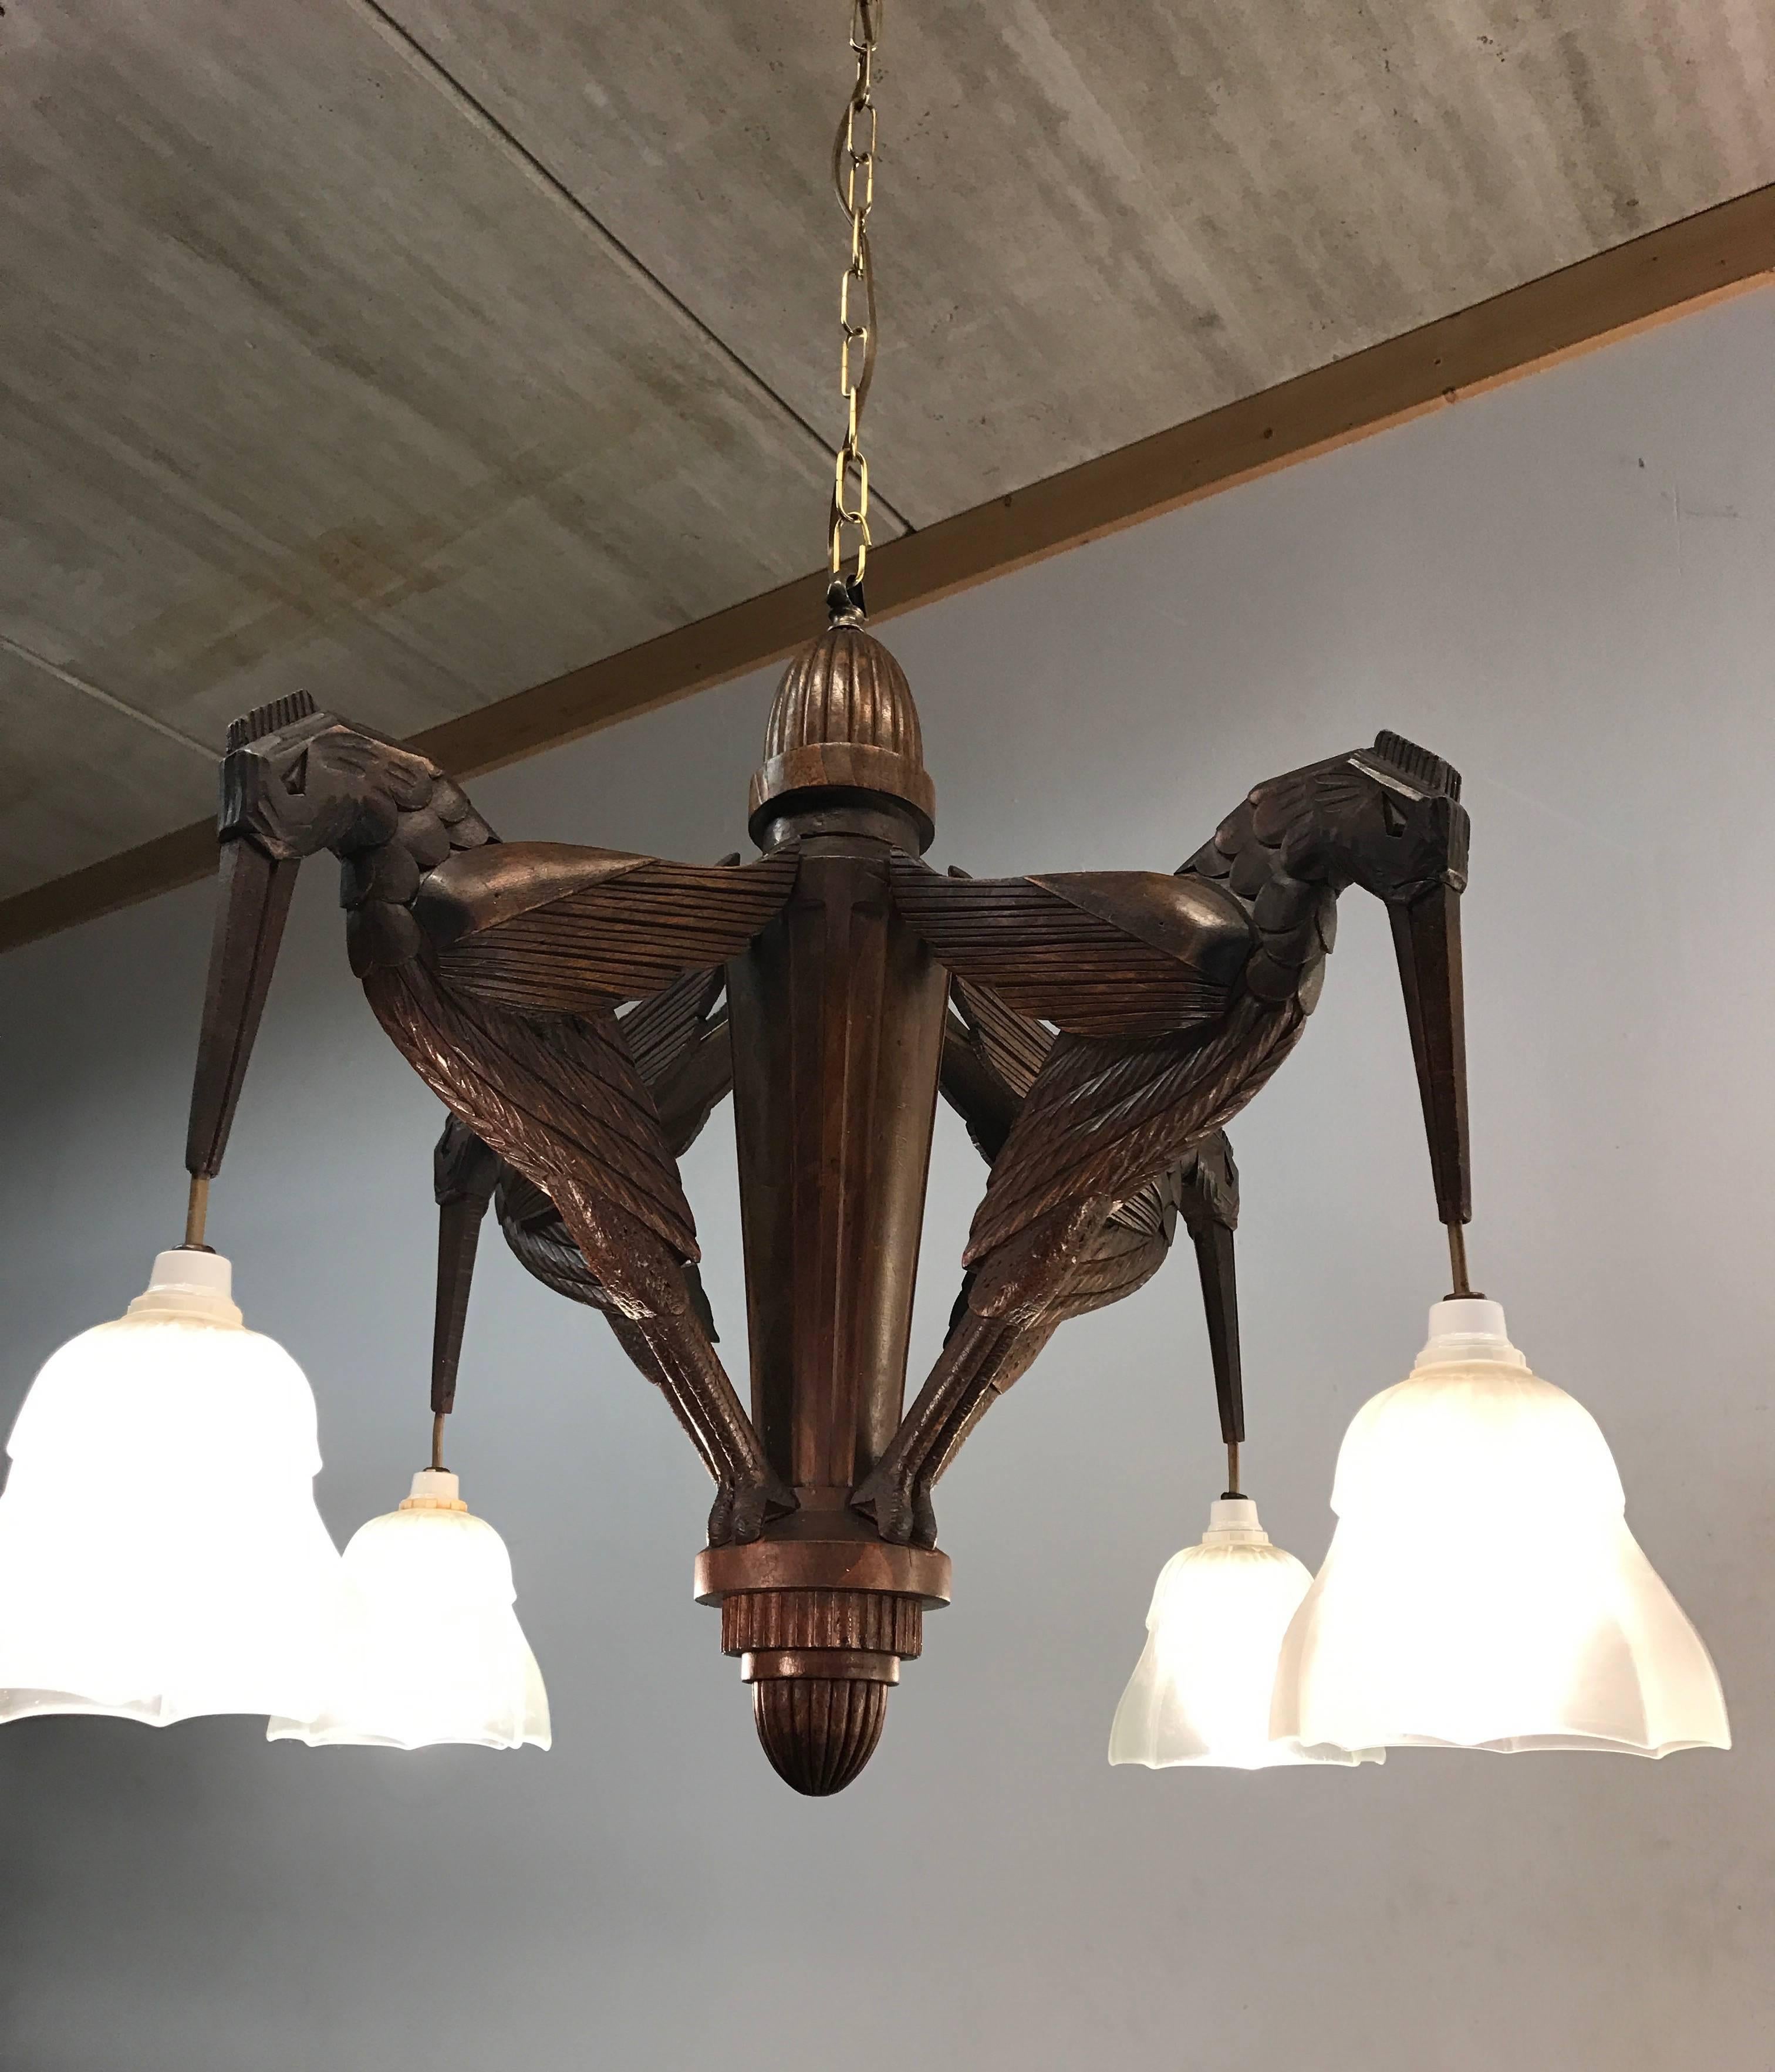 Unique, stylish and extremely decorative pendant.

If you are an applied arts enthousiast then this stunning Art Deco chandelier will really lift your spirit. This work of art from the early 1900s has four entirely hand-carved arms in the shape of